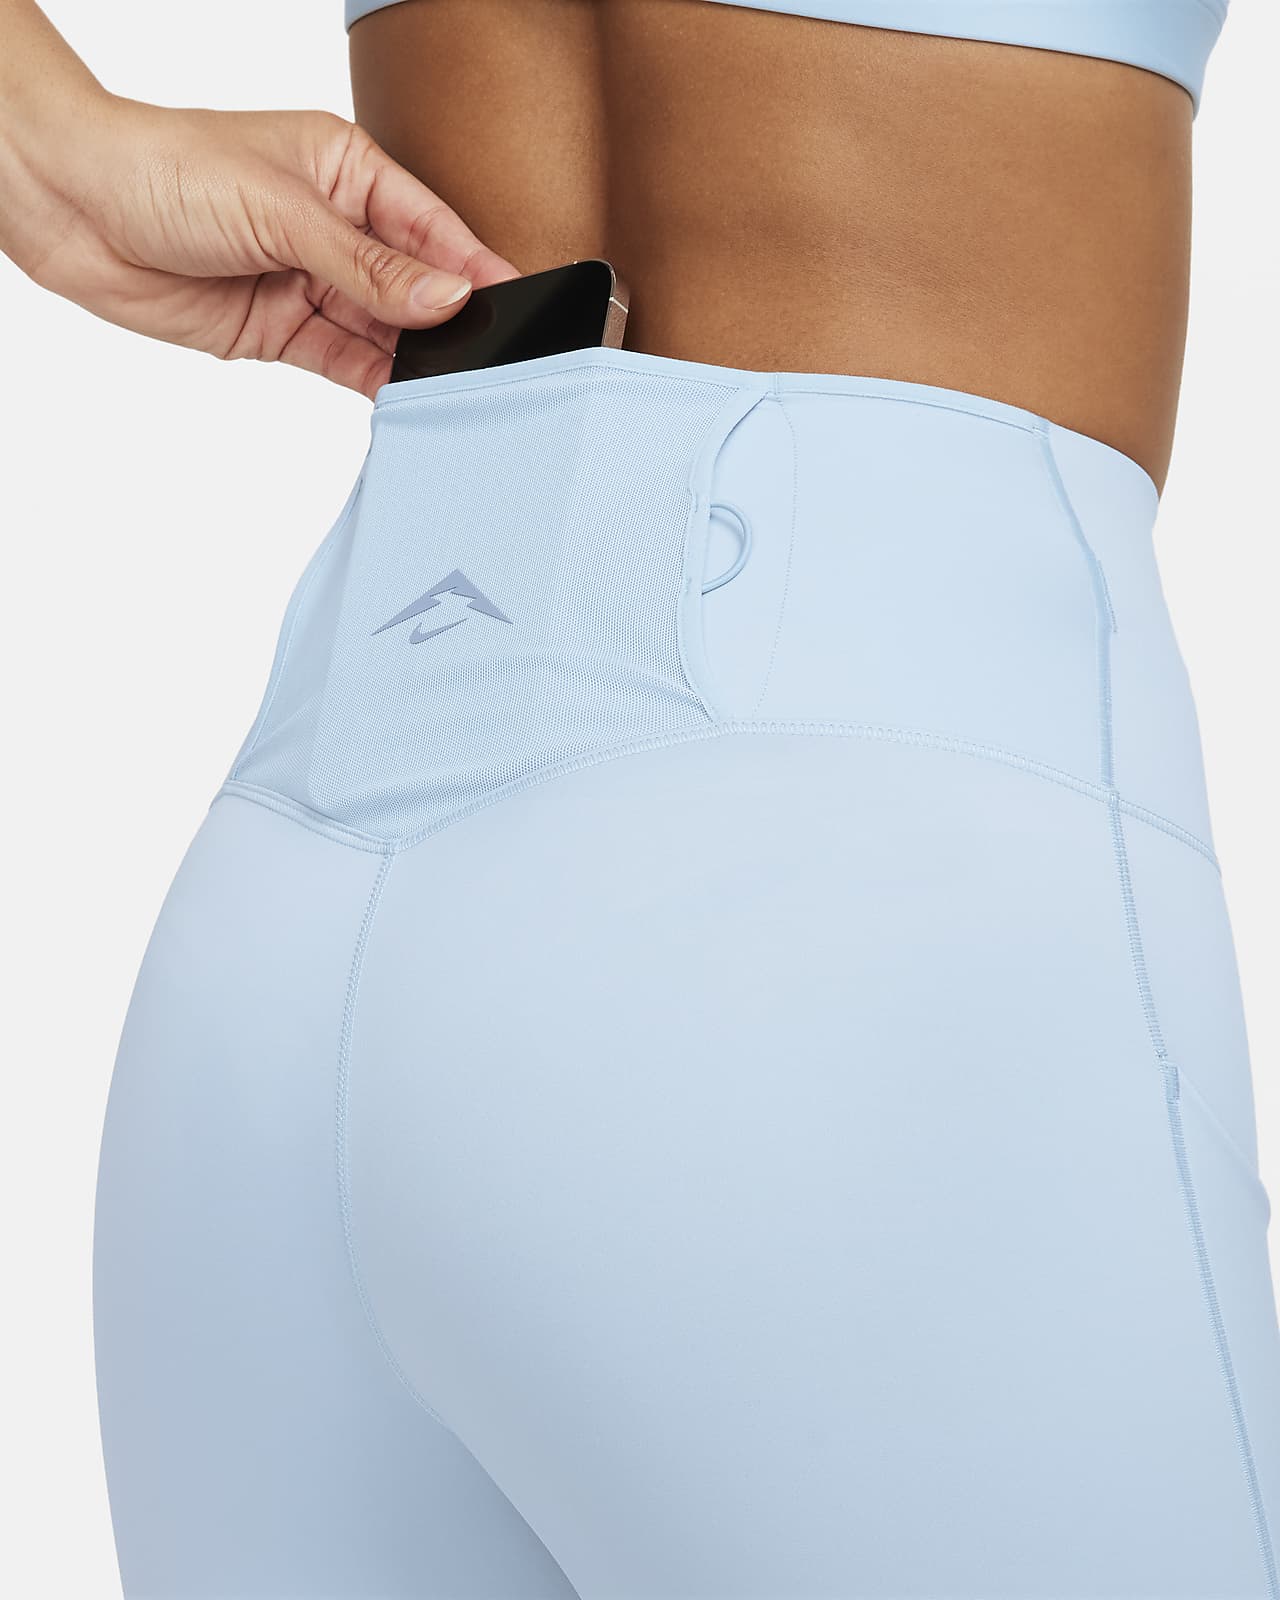 Nike Trail Go Women's Firm-Support High-Waisted 7/8 Leggings with Pockets.  Nike LU